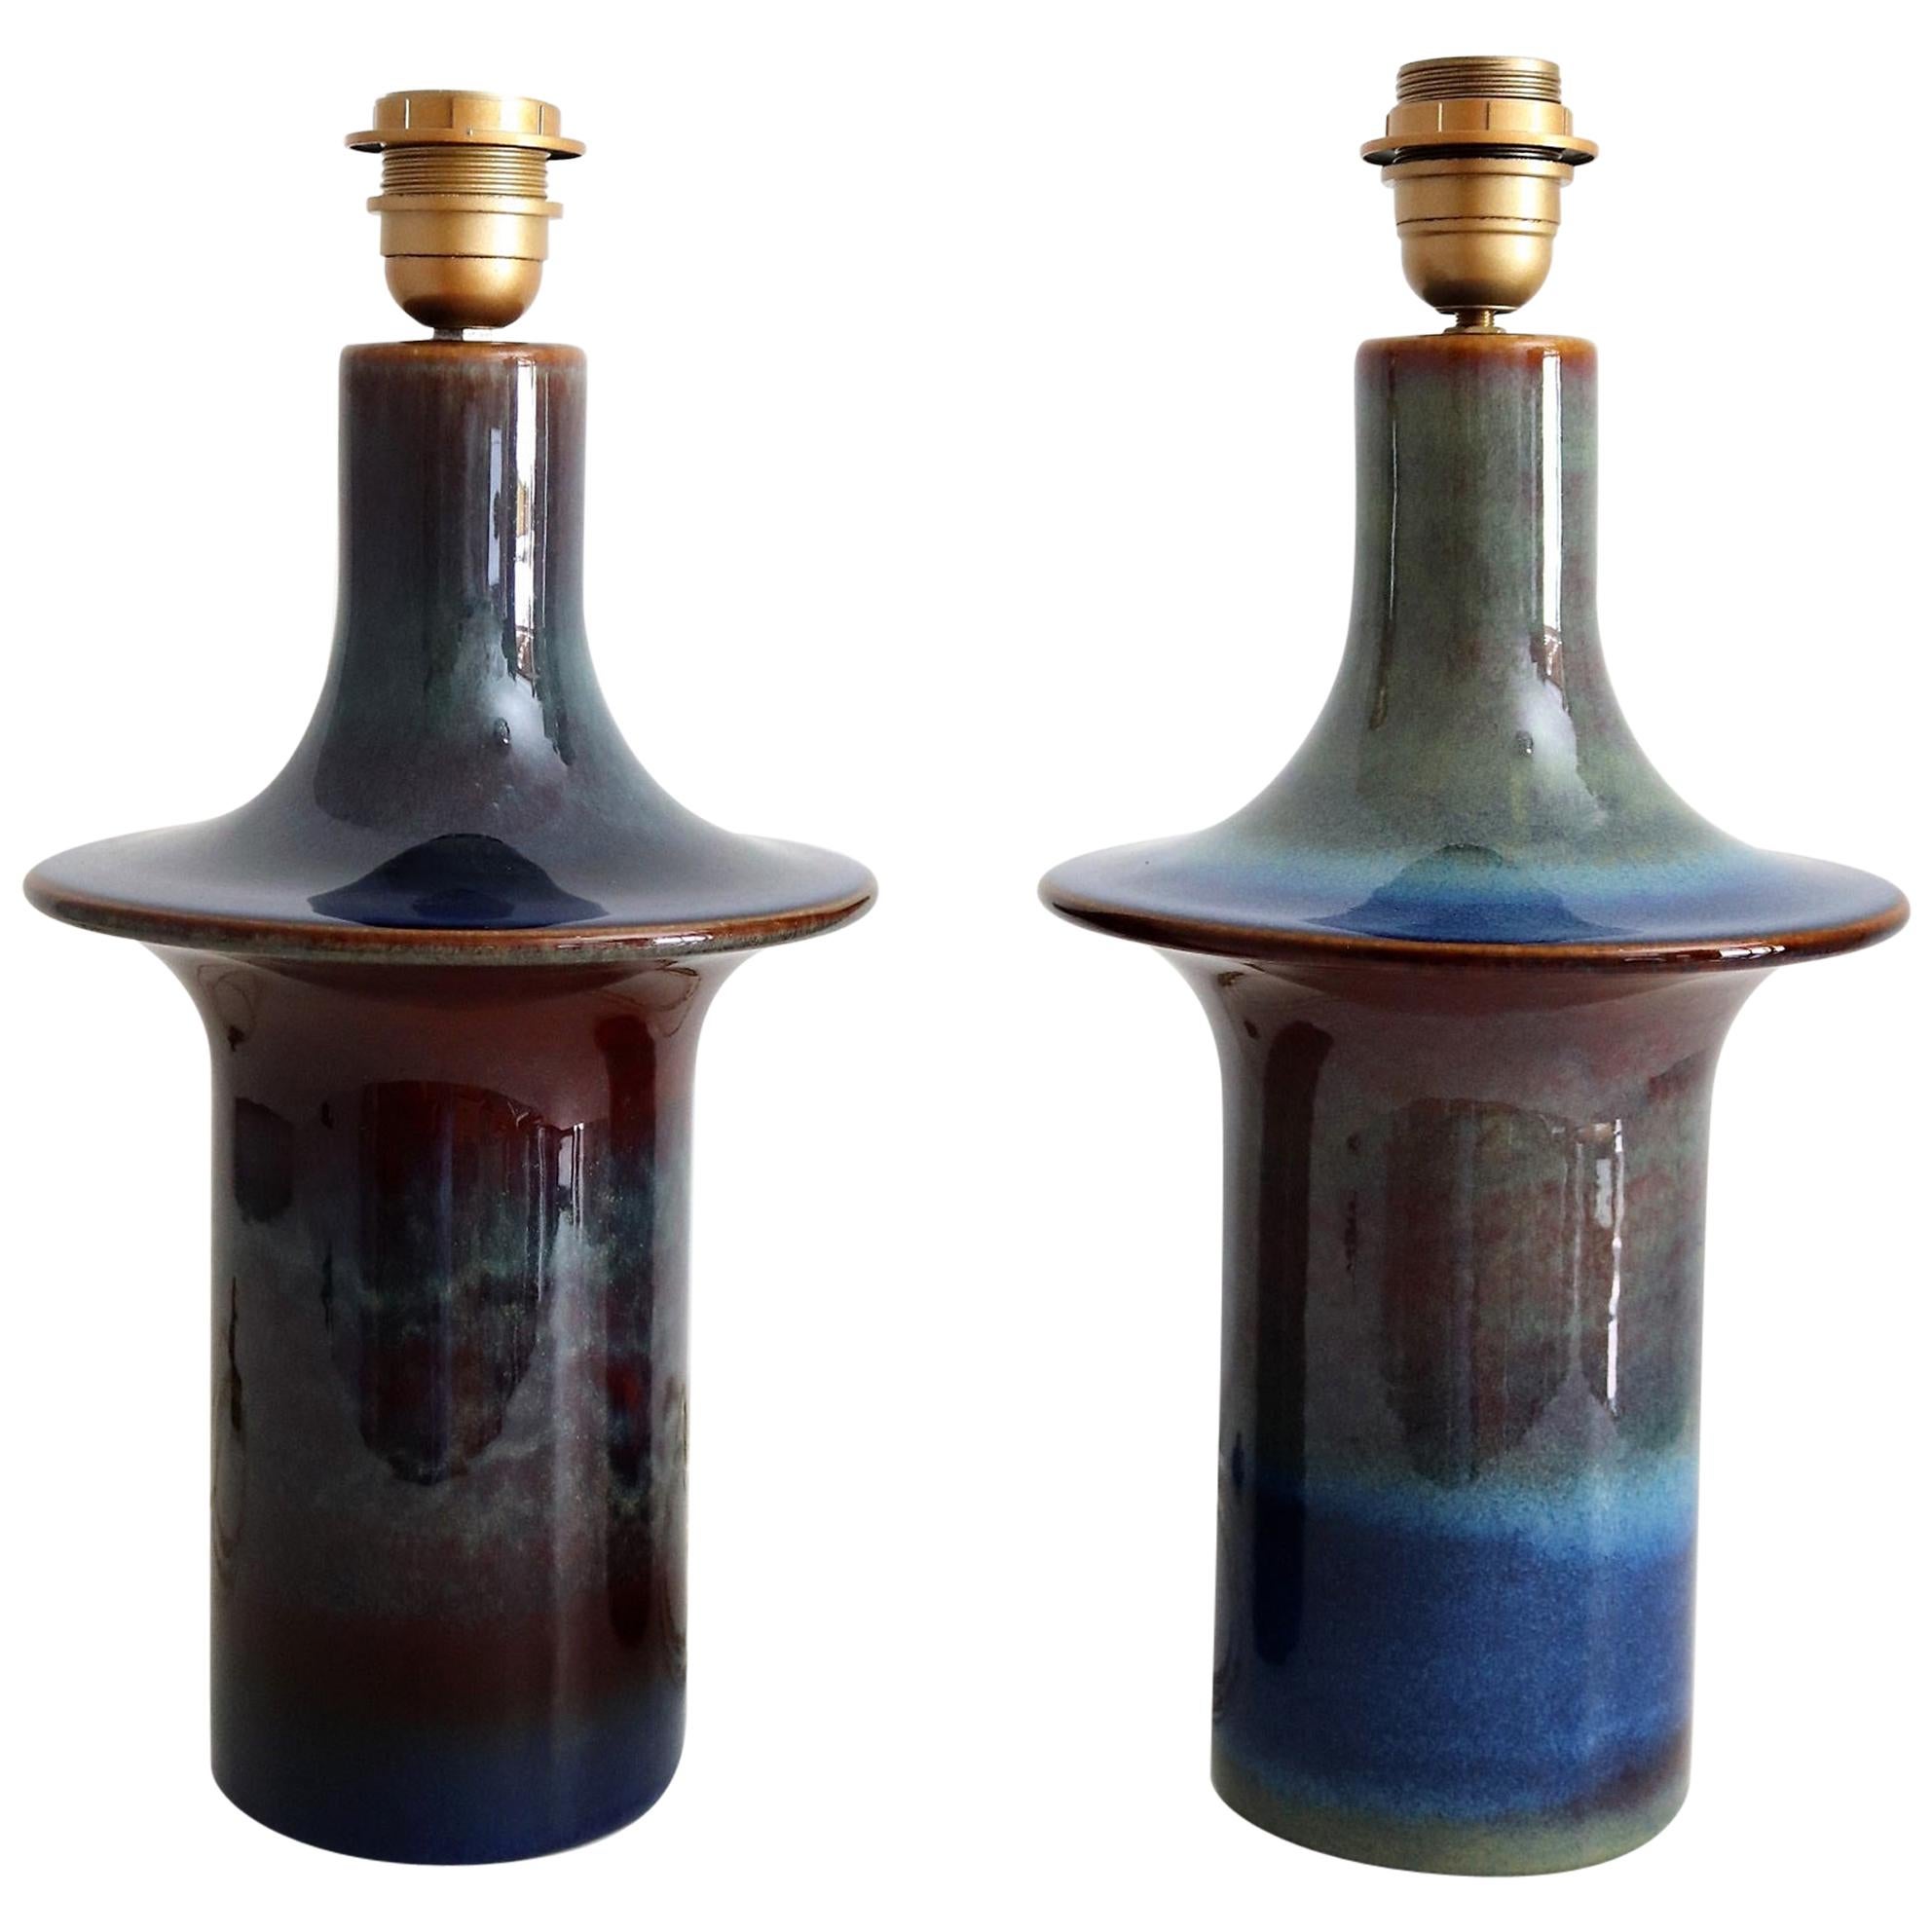 Beautiful pair of table lamps with gorgeous shiny multicolor glaze in mint refurbished condition.
The lamps have been made from Søholm Stentøj, Denmark and are both marked. One is little taller than the other.
Electrics as wires and bulb holders